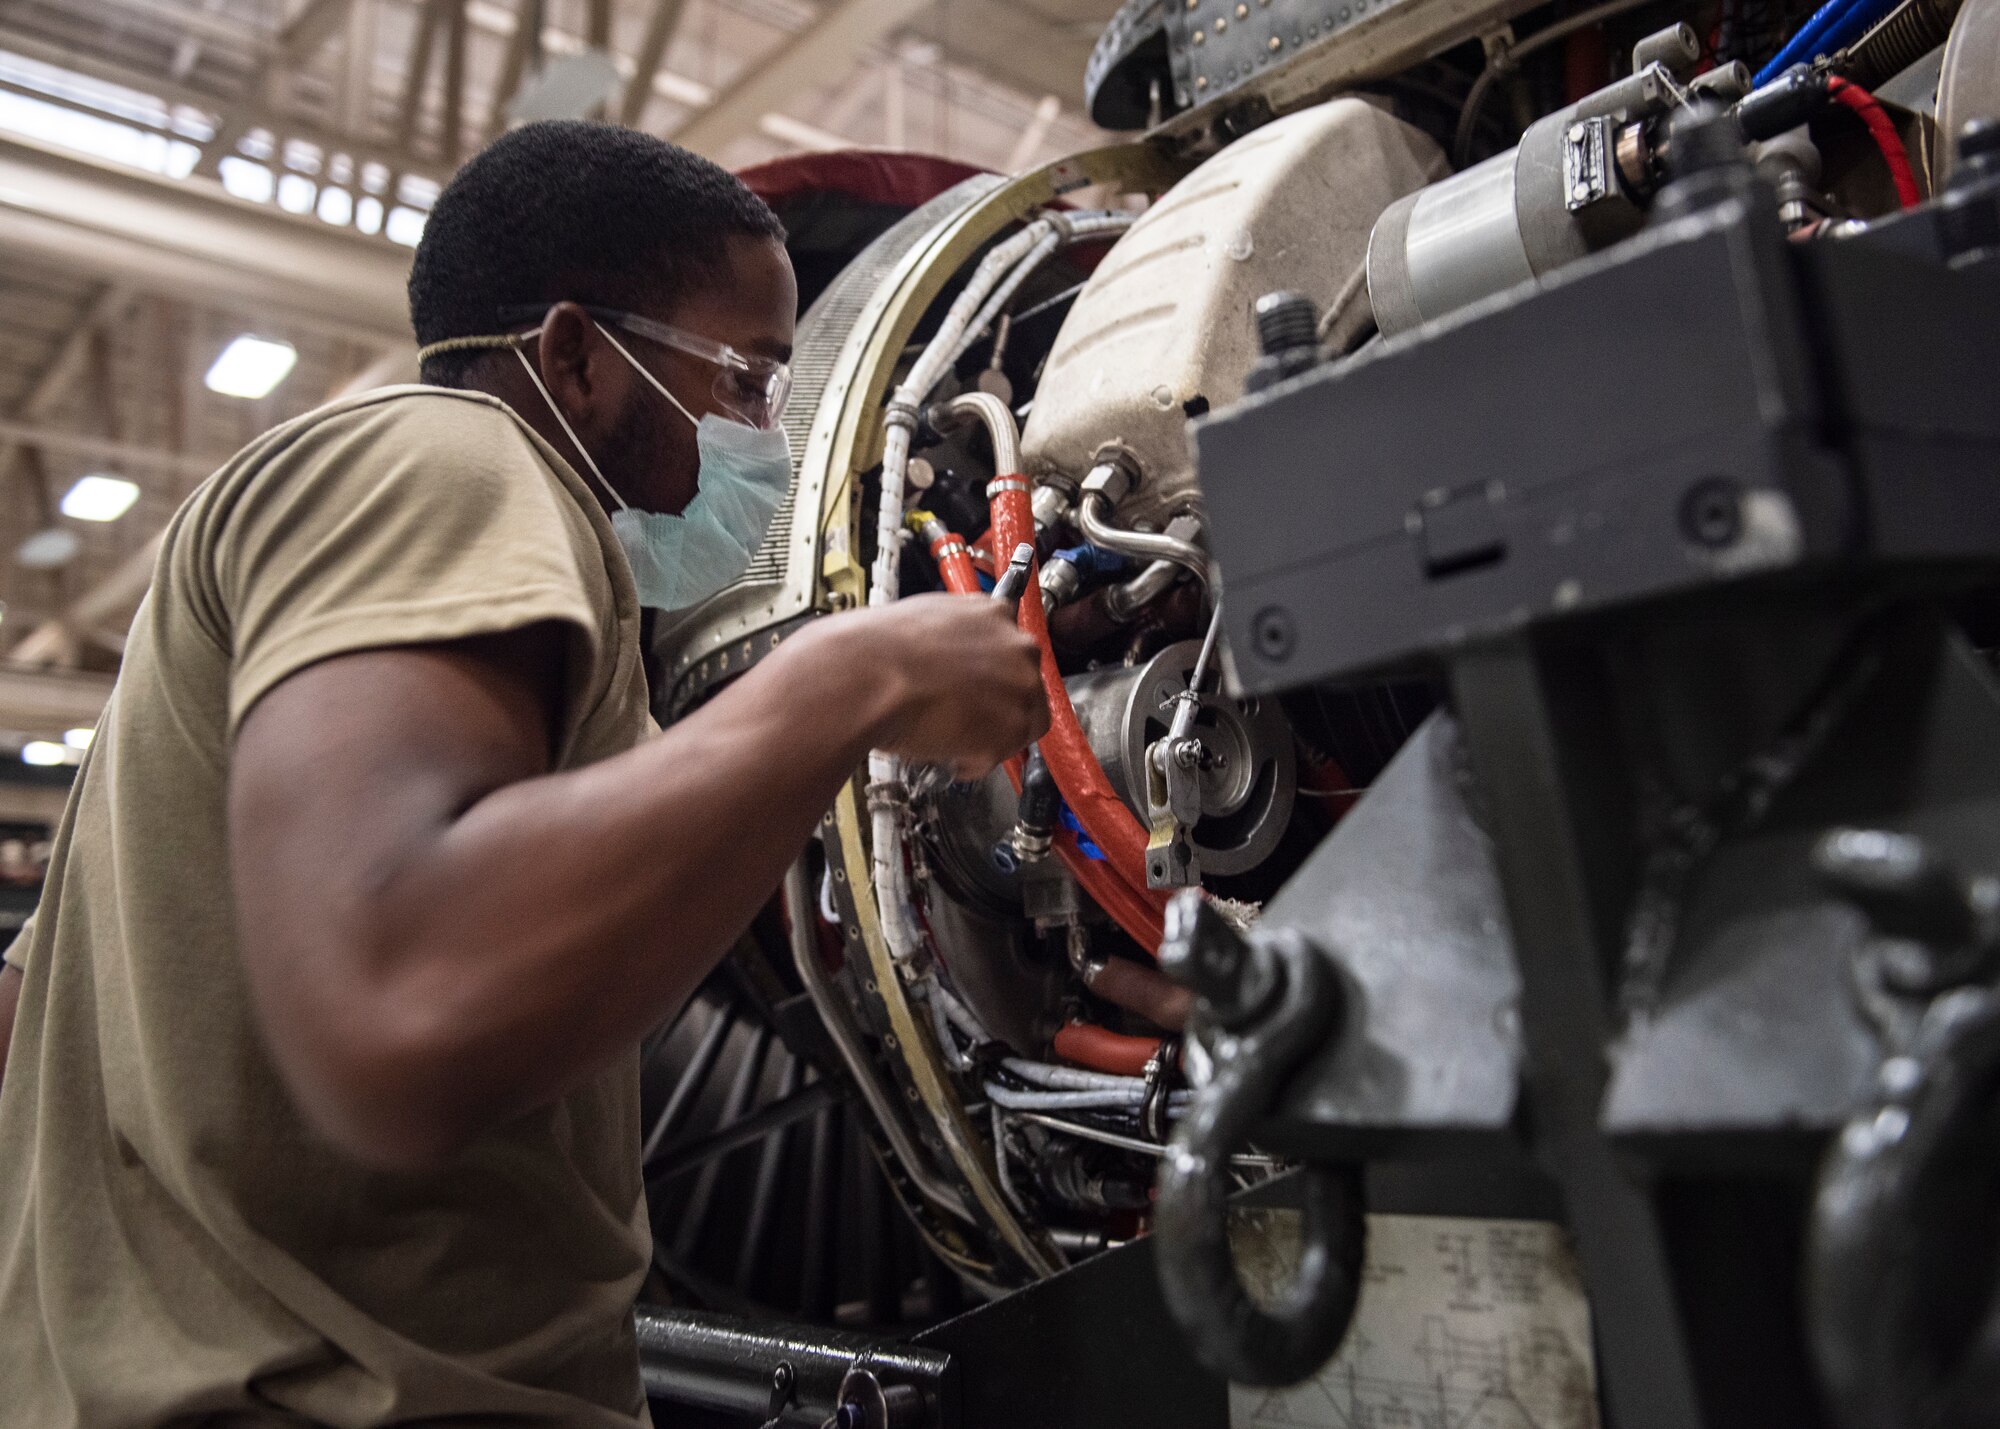 A 361st Training Squadron aerospace propulsion student wears a mask during training as precautions for the COVID-19 virus at Sheppard Air Force Base, Texas, June 1, 2020. The student is working on an aircraft engine. (U.S. Air Force photo by Senior Airman Pedro Tenorio)